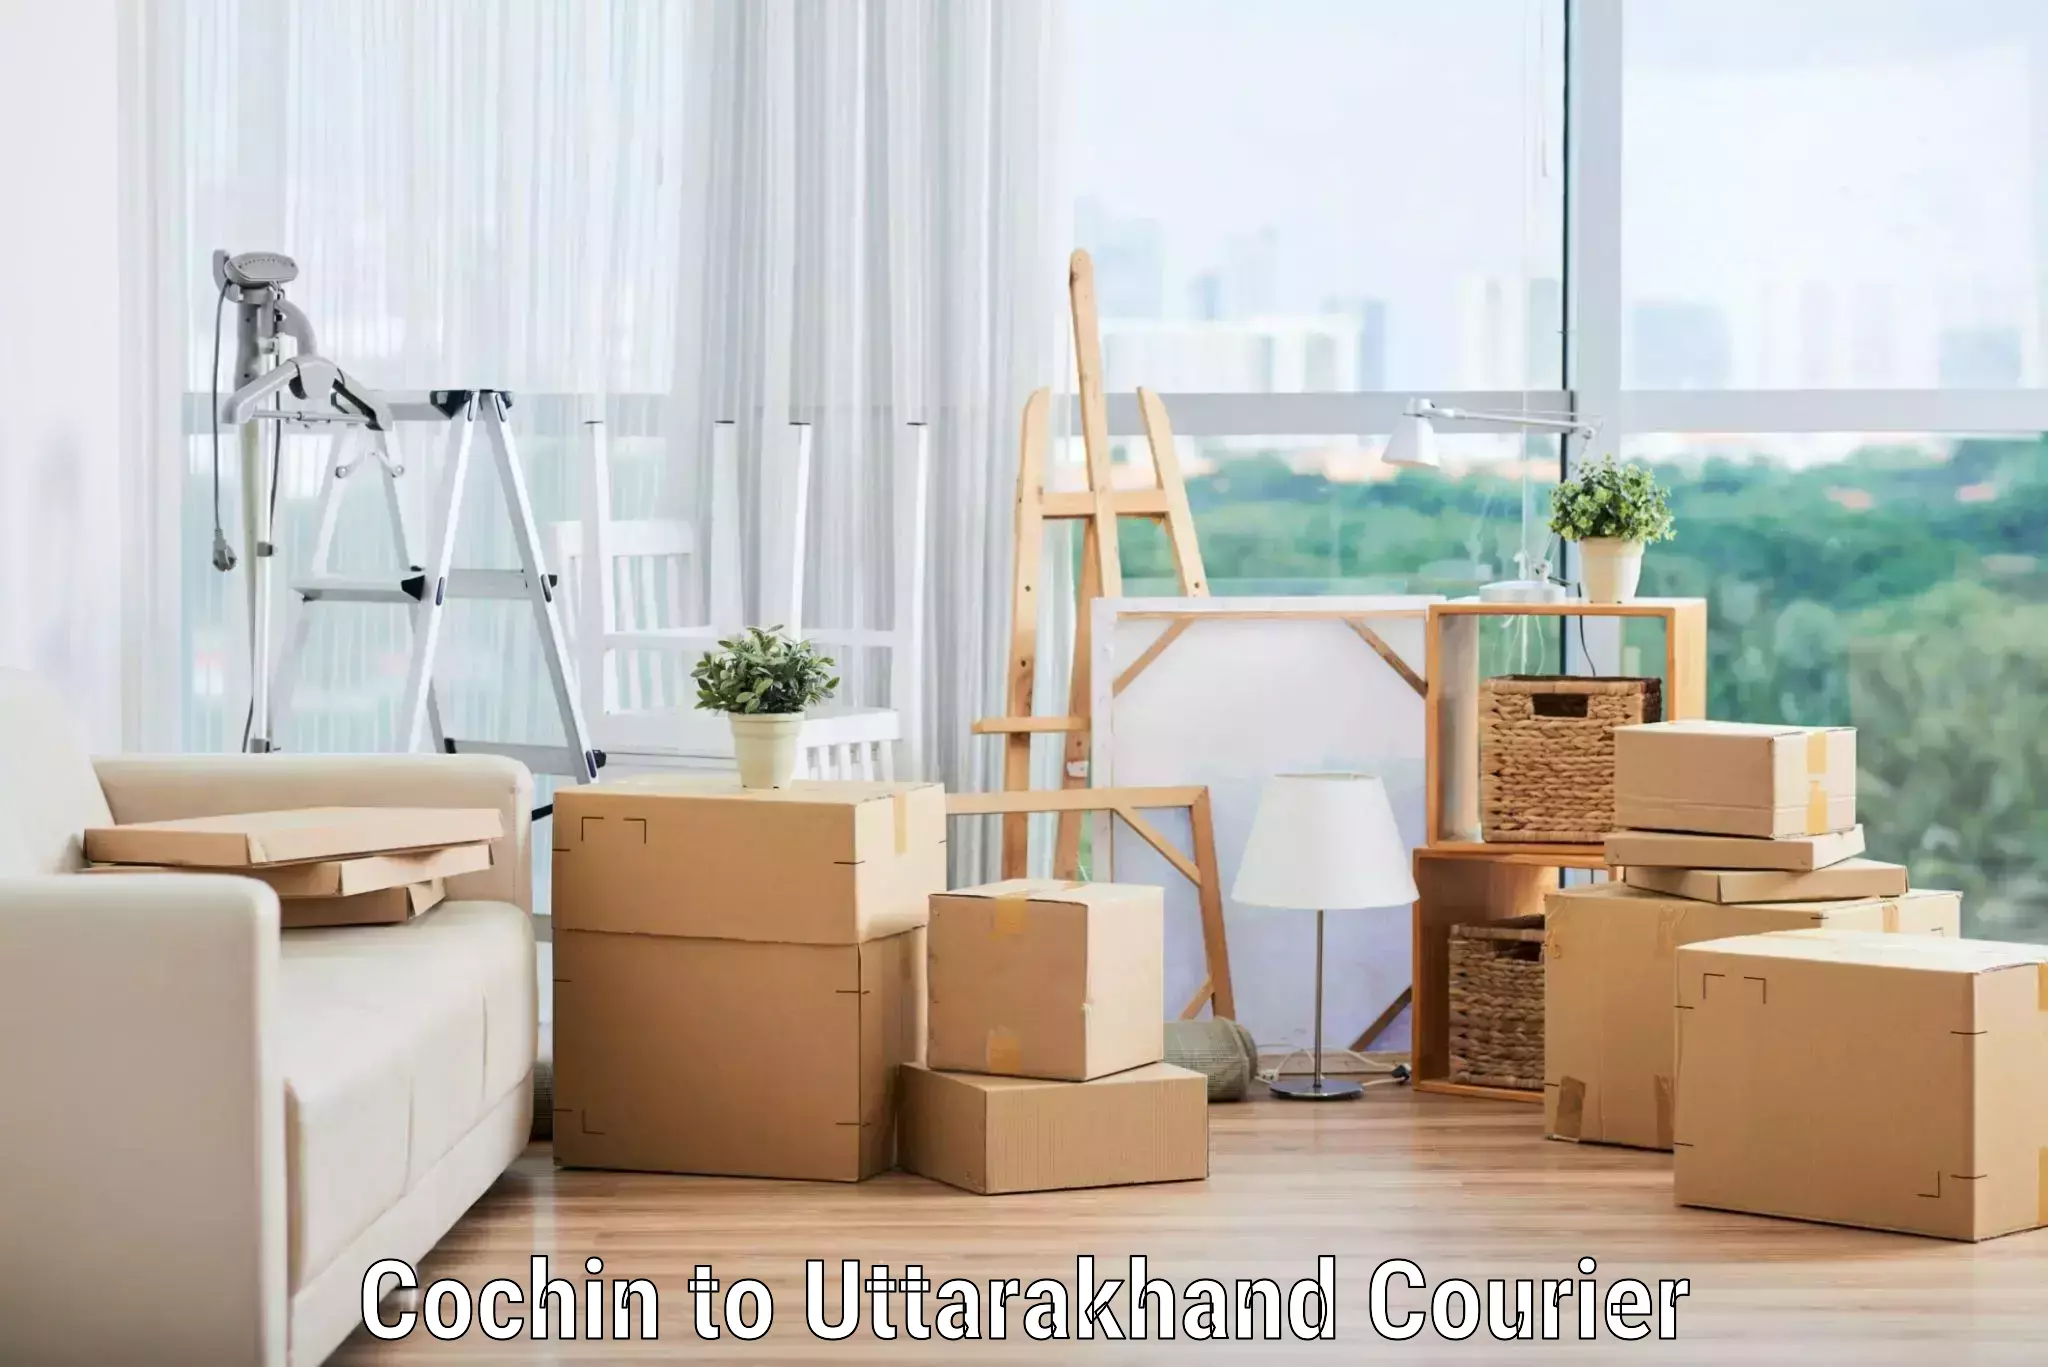 Home relocation experts Cochin to Bhagwanpur